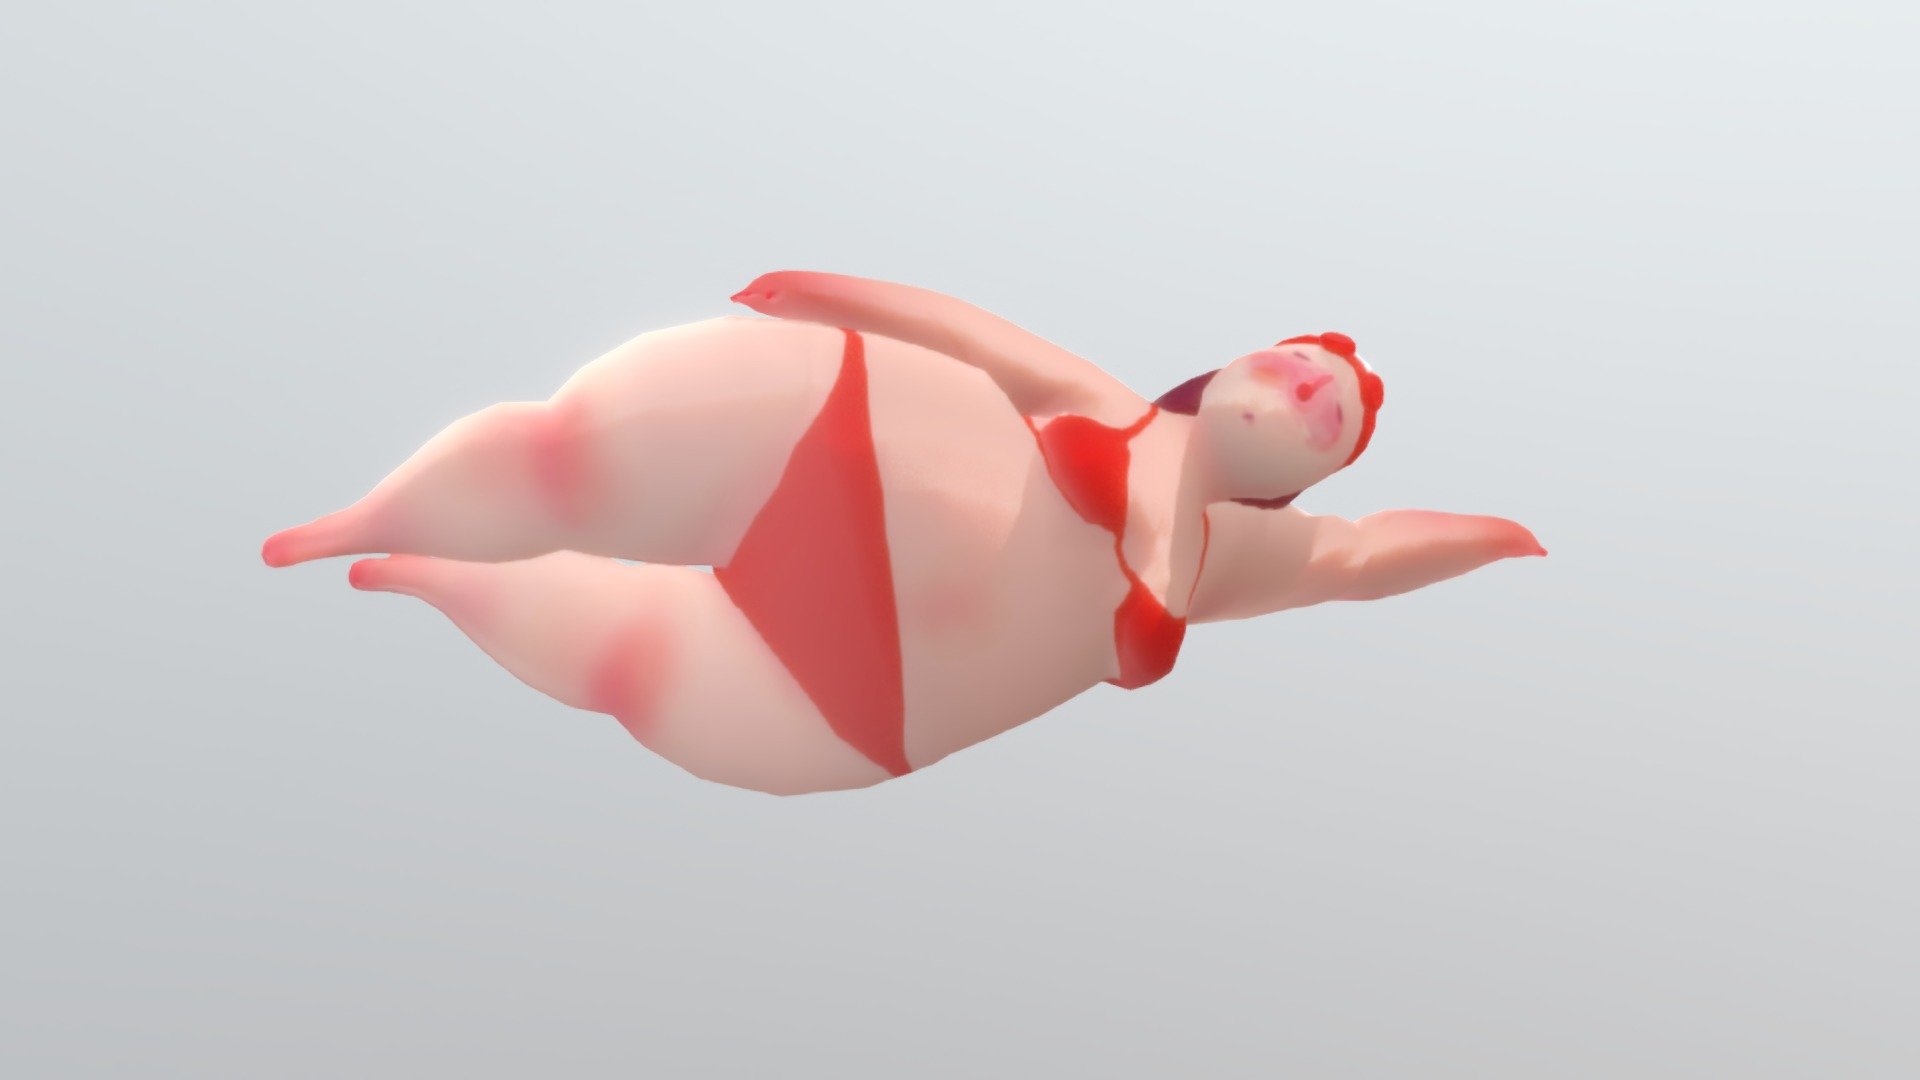 From our team’s art installation powered by UE4: Salsa Swims 3d model